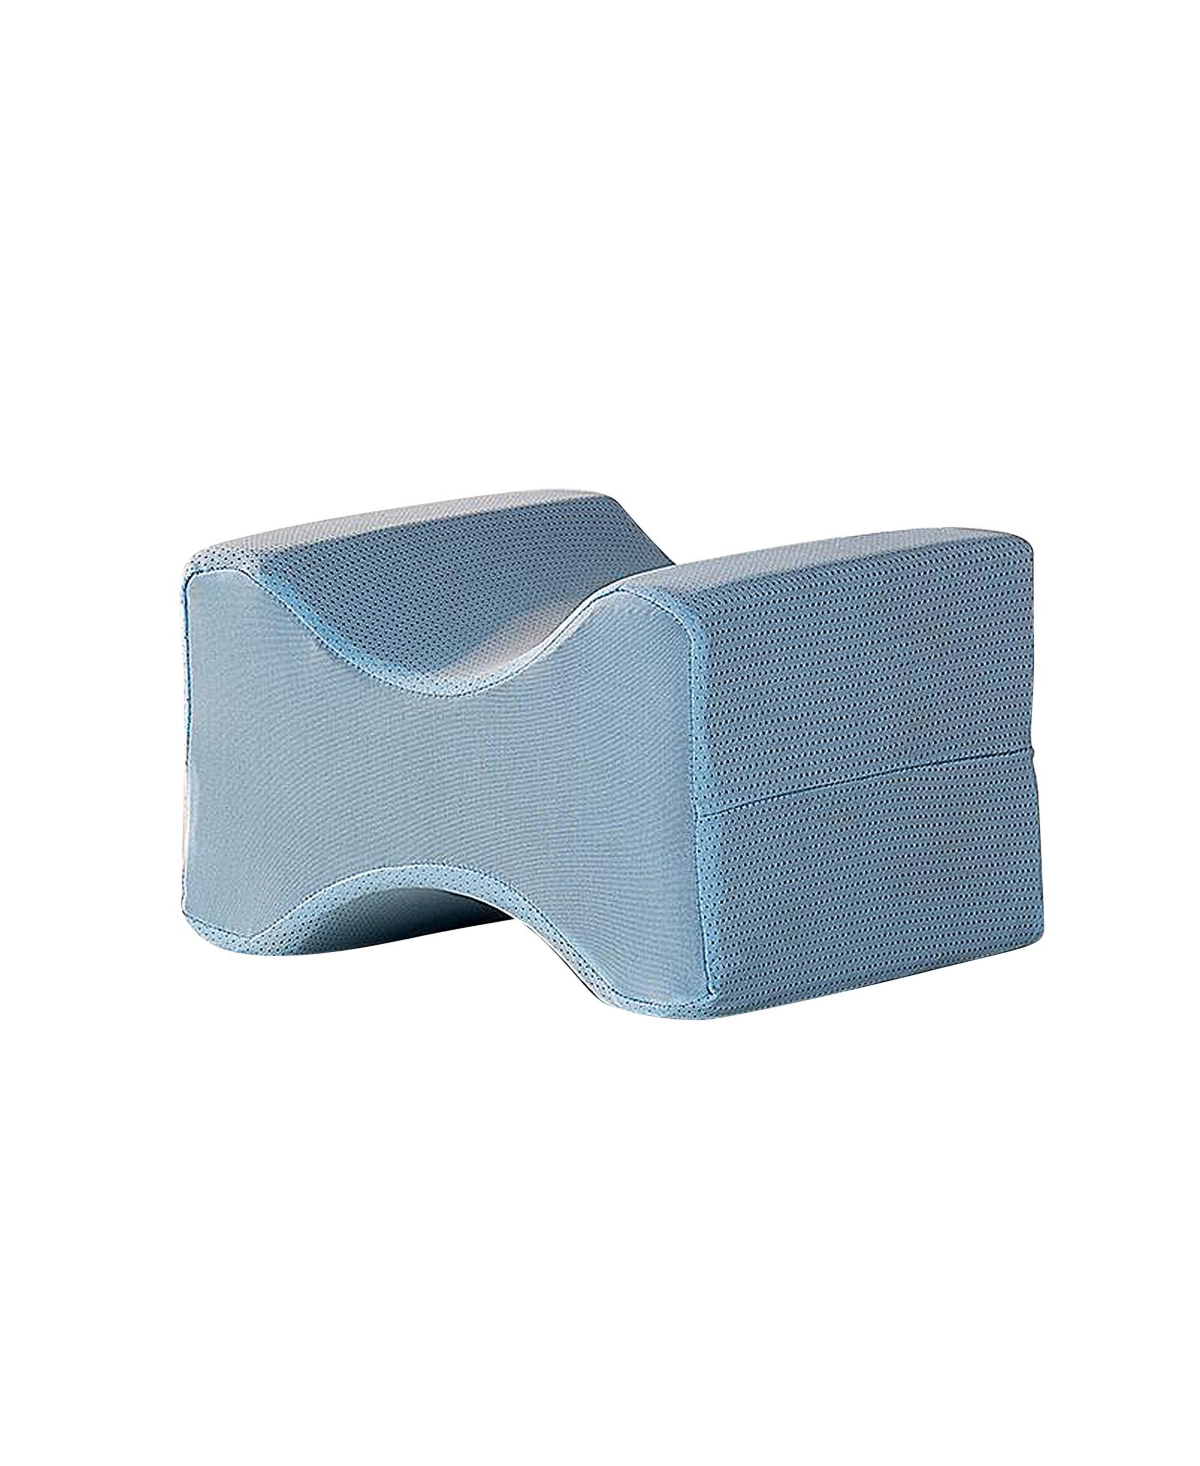 Dr Pillow Cooling Thigh Pillow In Blue